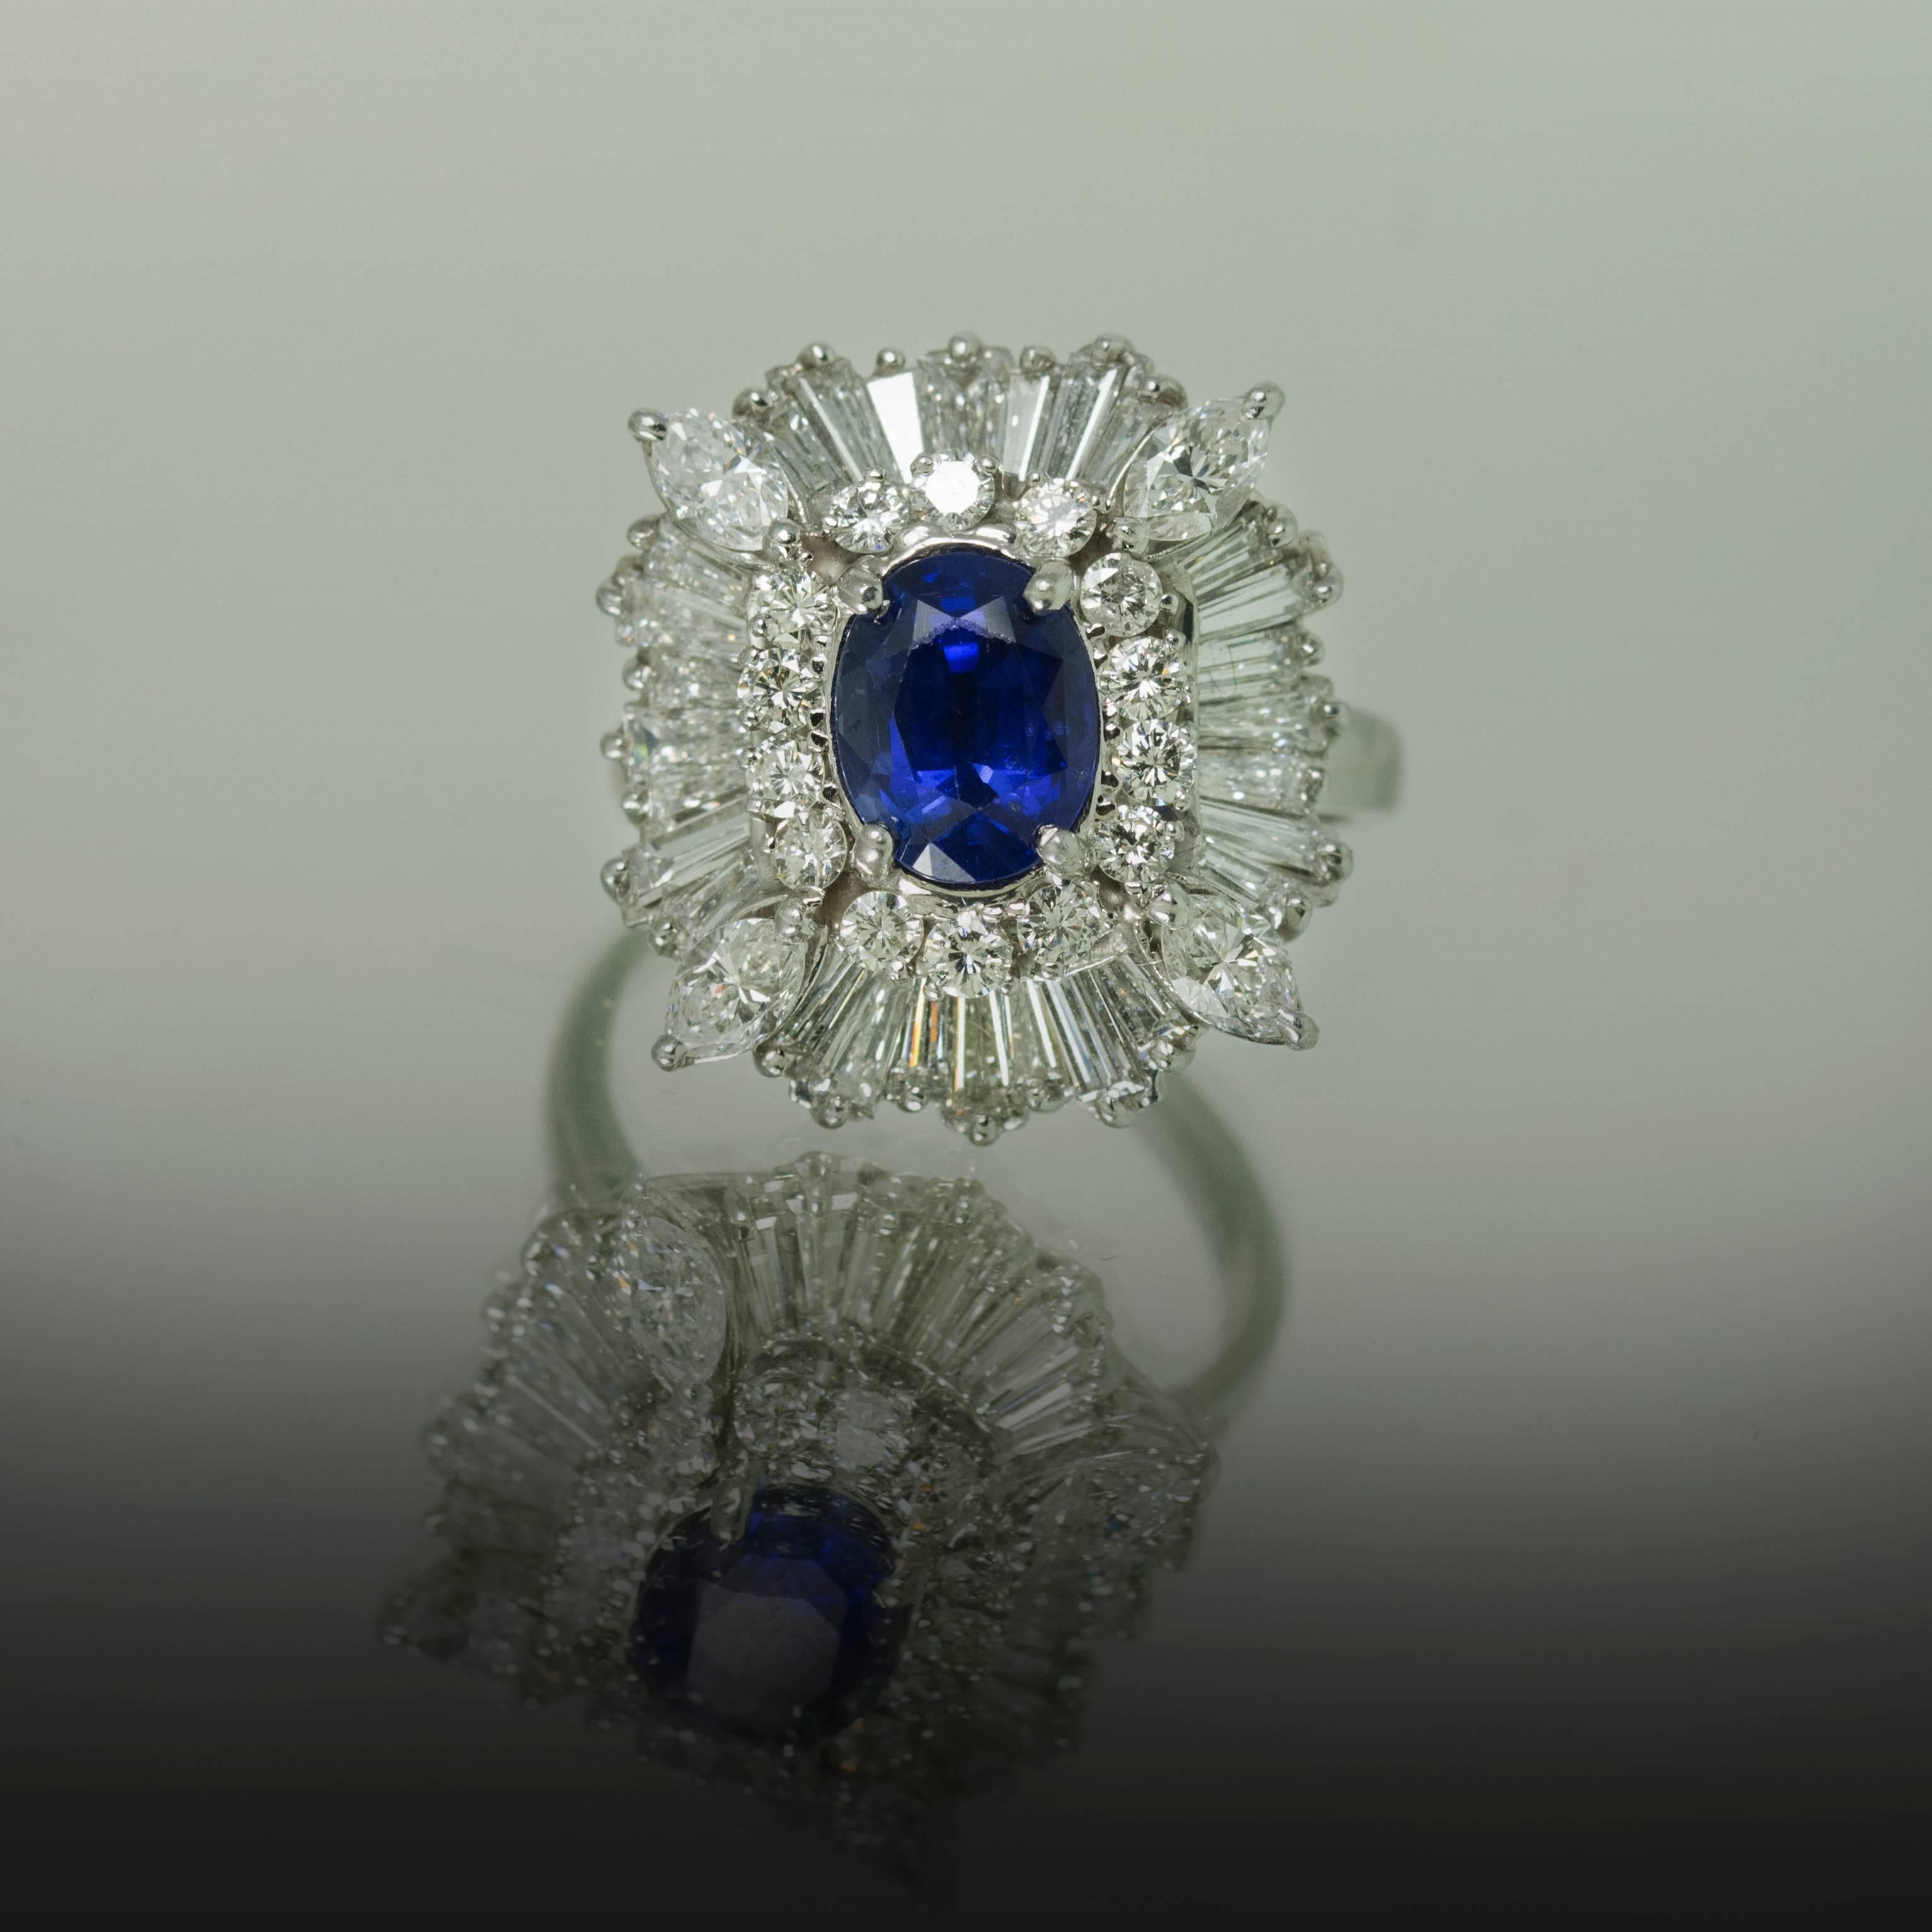 Royal Blue Ceylon Sapphire Diamond Platinum Ring  In Excellent Condition For Sale In Sarasota, FL